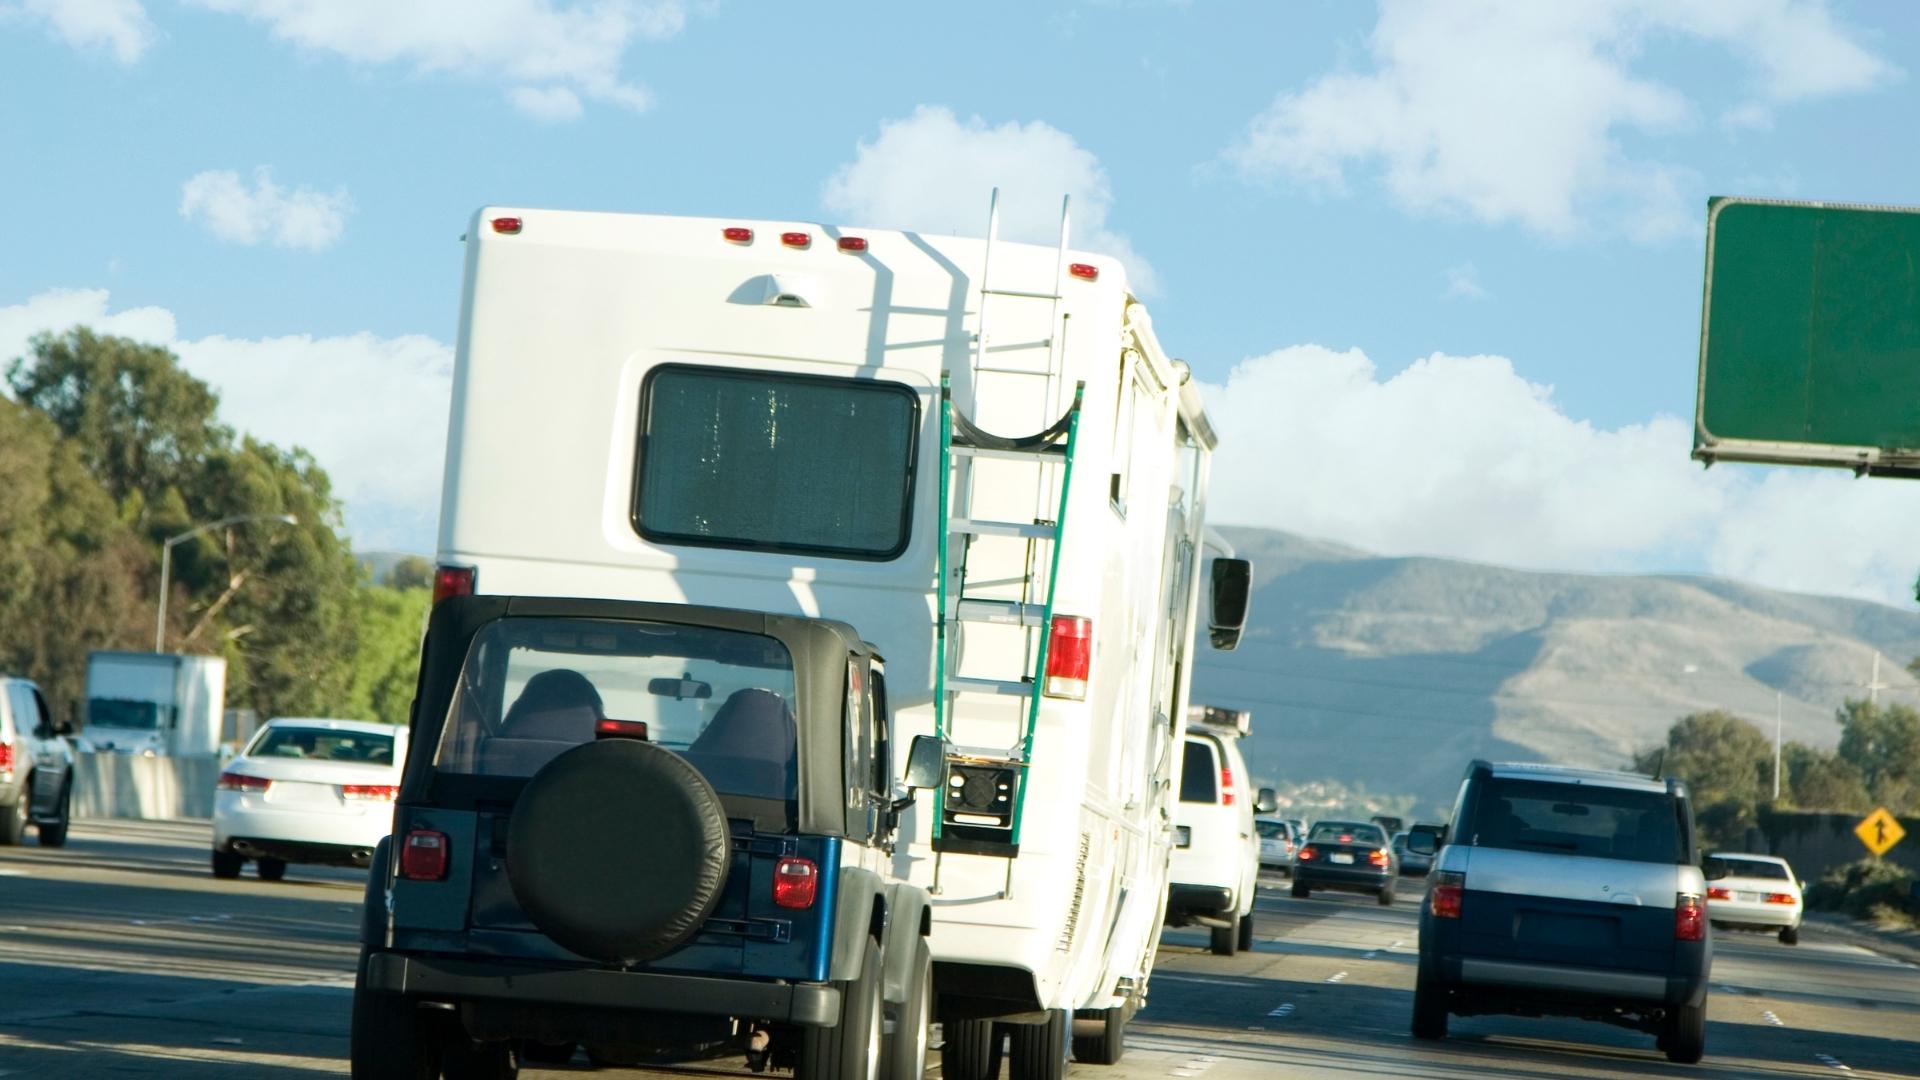 A tall, flat-sided RV driving along the highway is a fairly frequent reason behind the most common RV accidents.